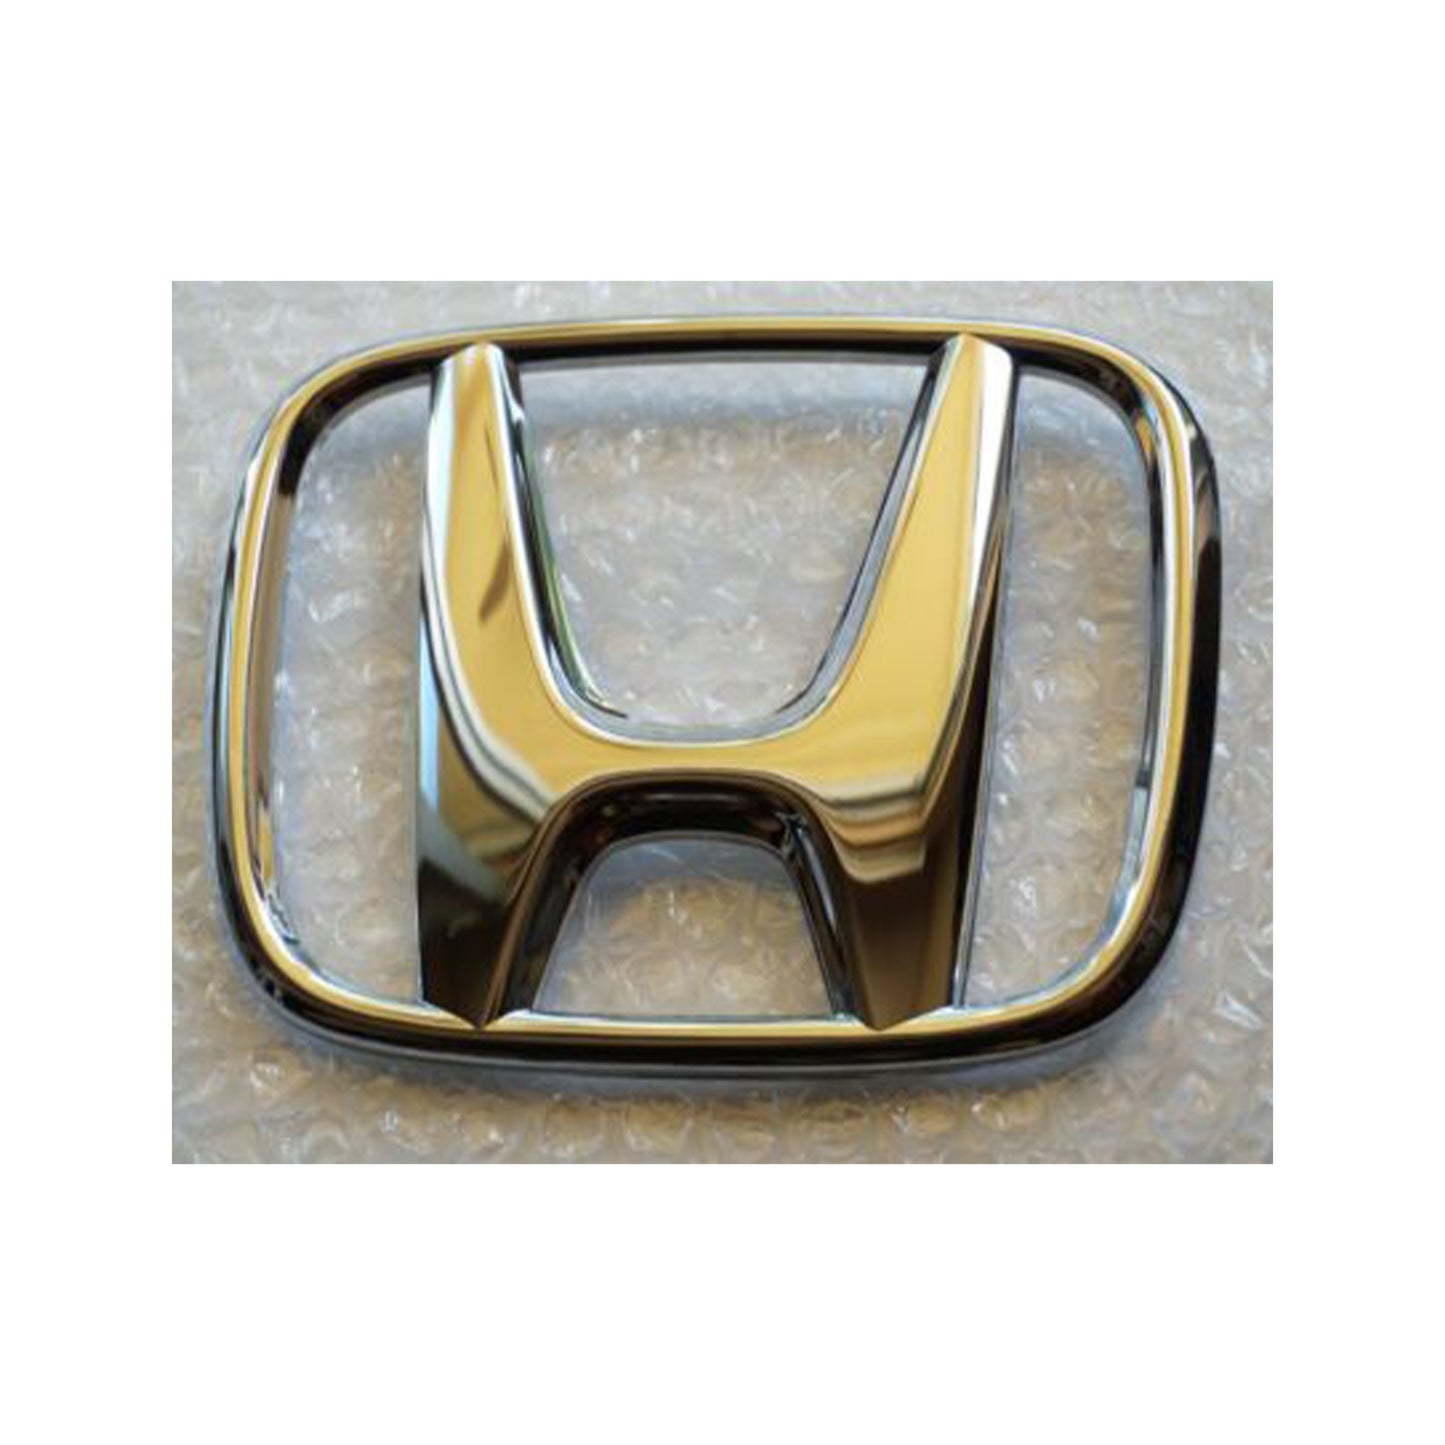 2008-2017 Honda Accord Emblem 09-11 Civic Front Grille 15-17 FiT H 10-11 CRV Logo This Emblem Measures 4.8 inches x 3.9 inches